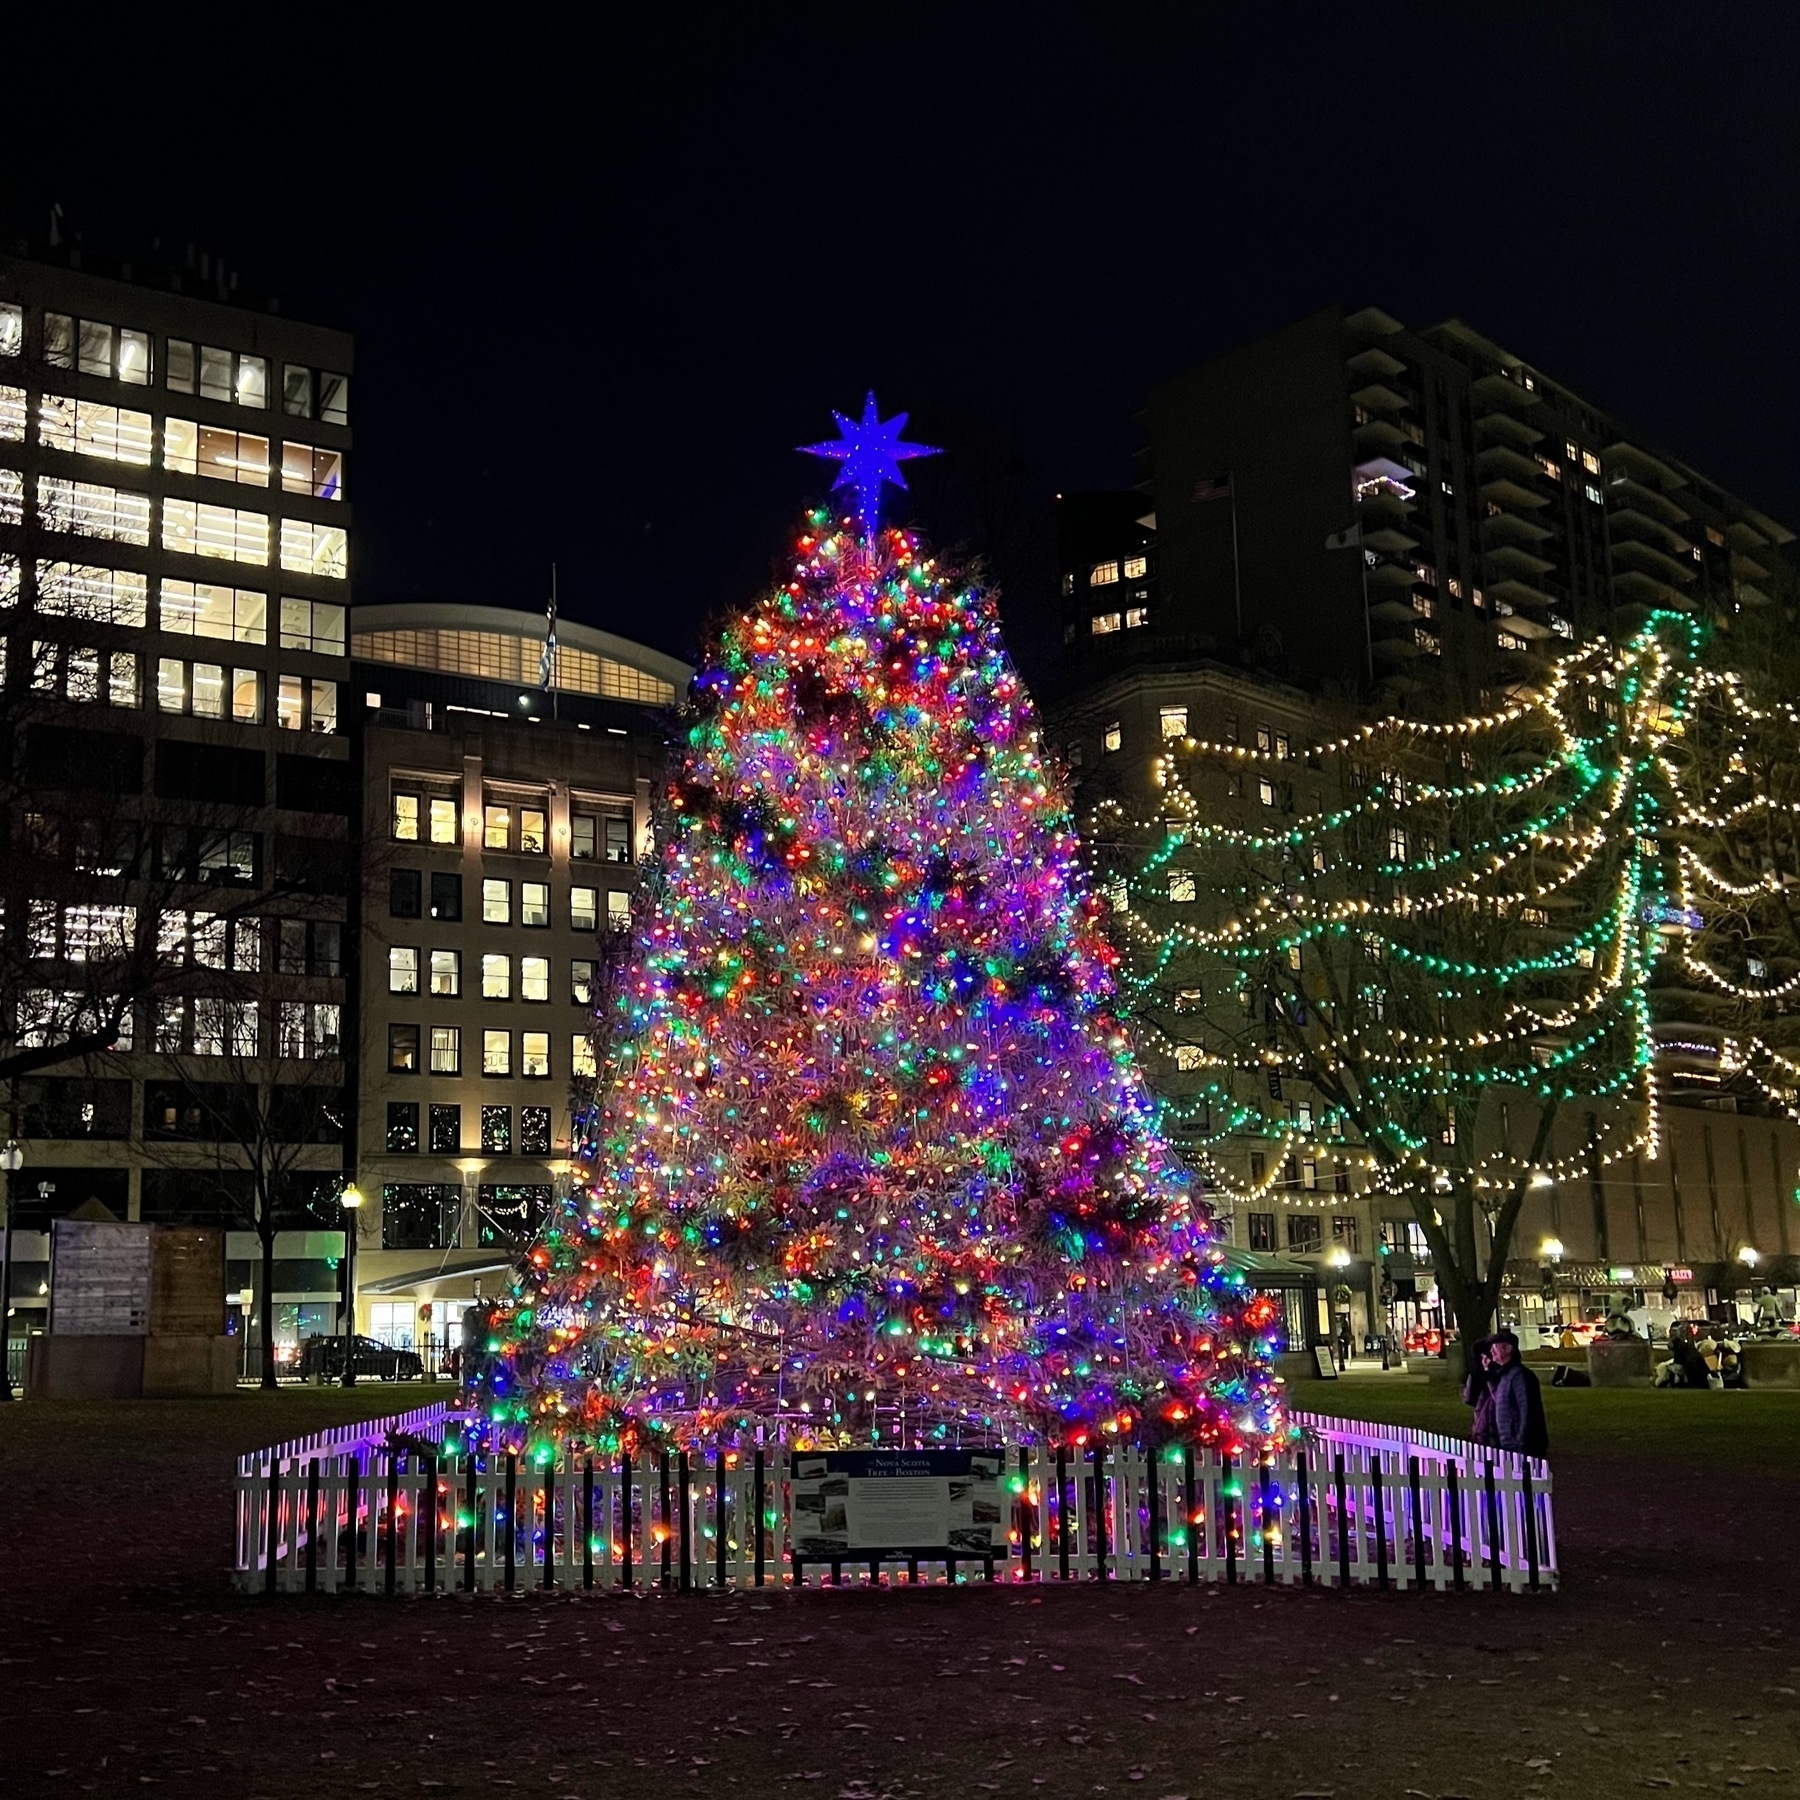 The 2023 Boston Christmas Tree on Boston Common. The tree is given annually by Nova Scotia in remembrance of aid sent by Boston in the aftermath of the 1917 Halifax Explosion.